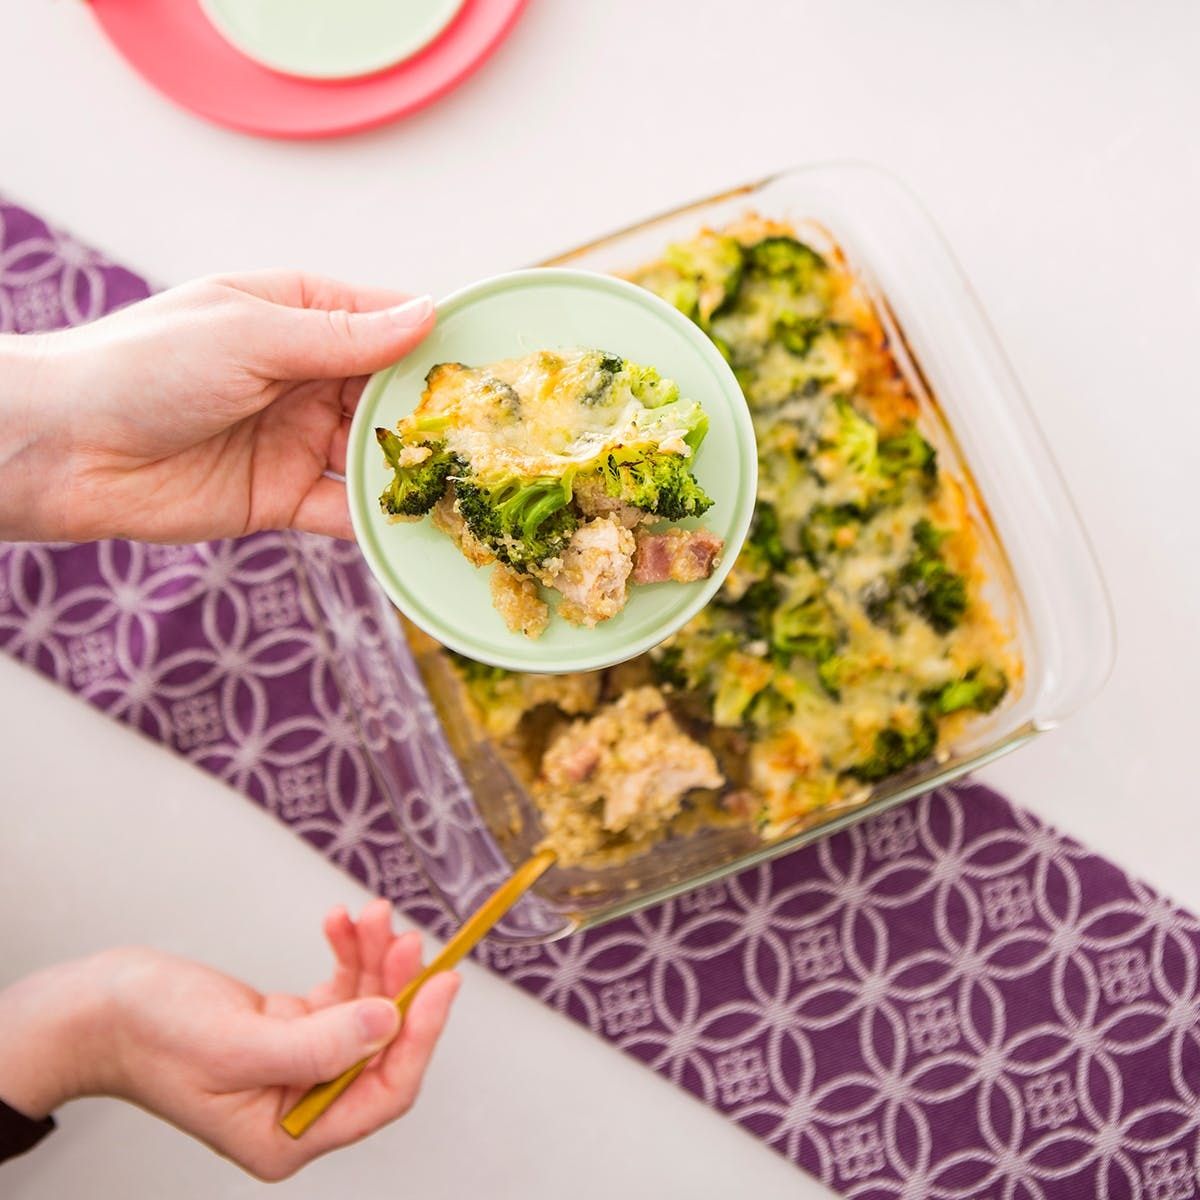 Pinterest's Top Casserole Recipe Is Equal Parts Indulgent and Healthy